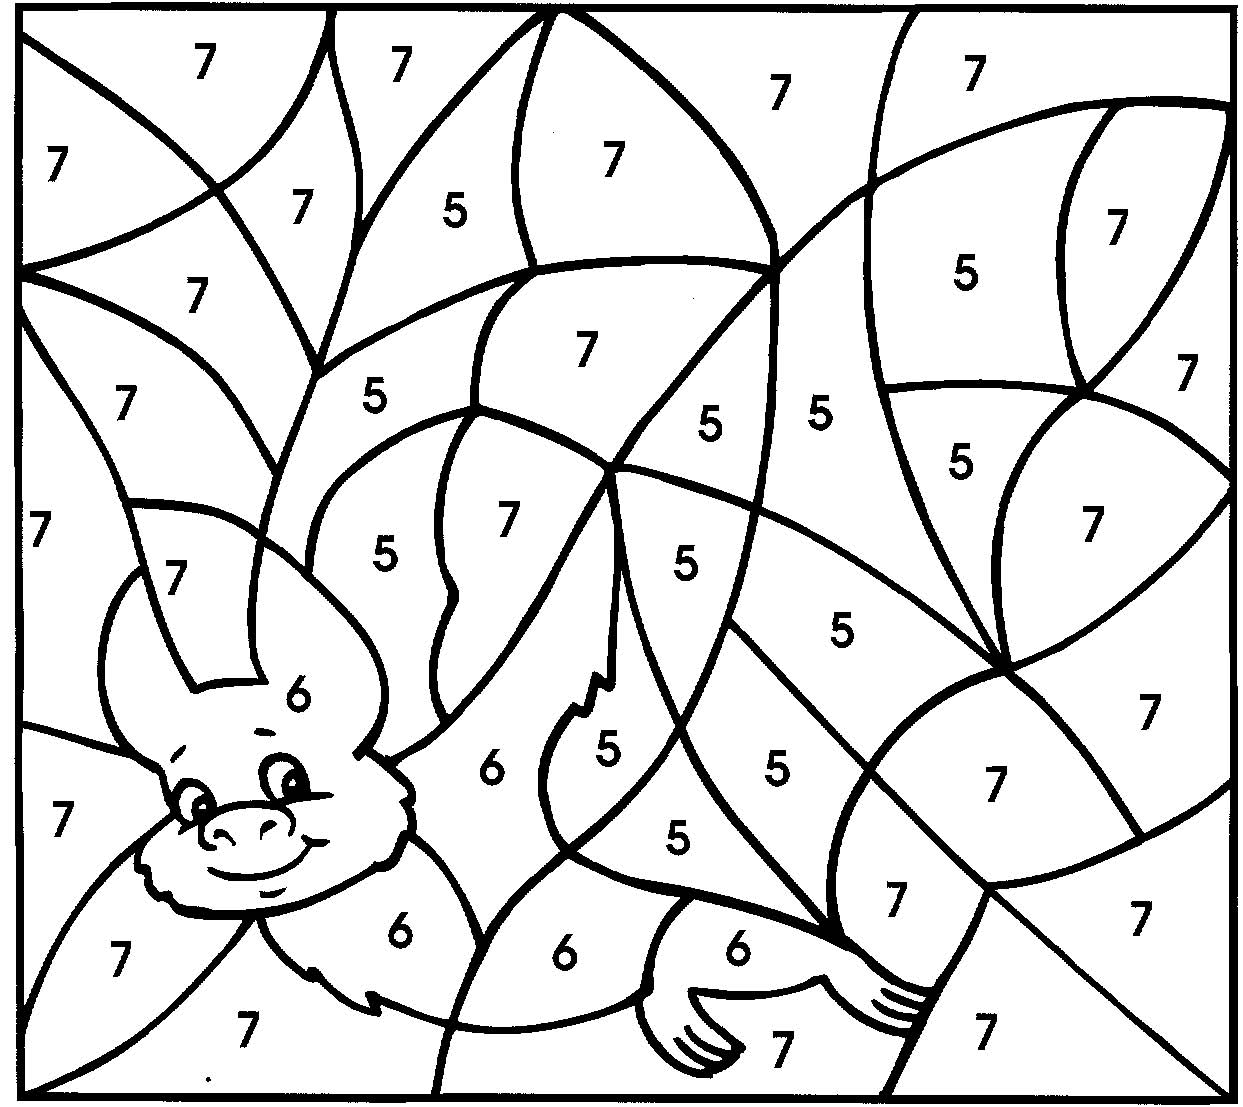 Coloring page: Bat (Animals) #2048 - Free Printable Coloring Pages